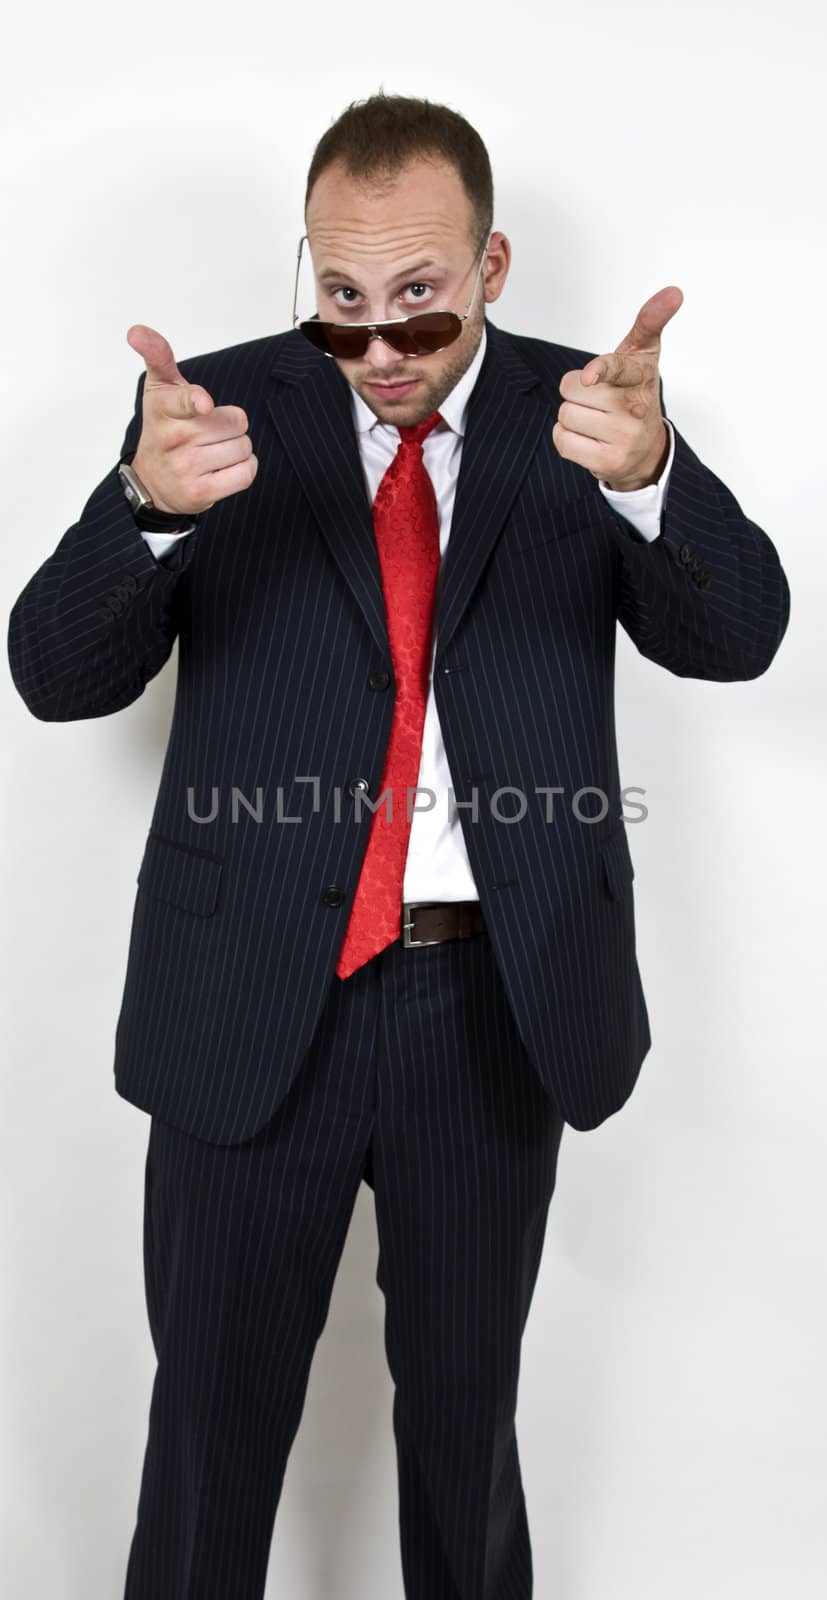 pointing male on isolated background
